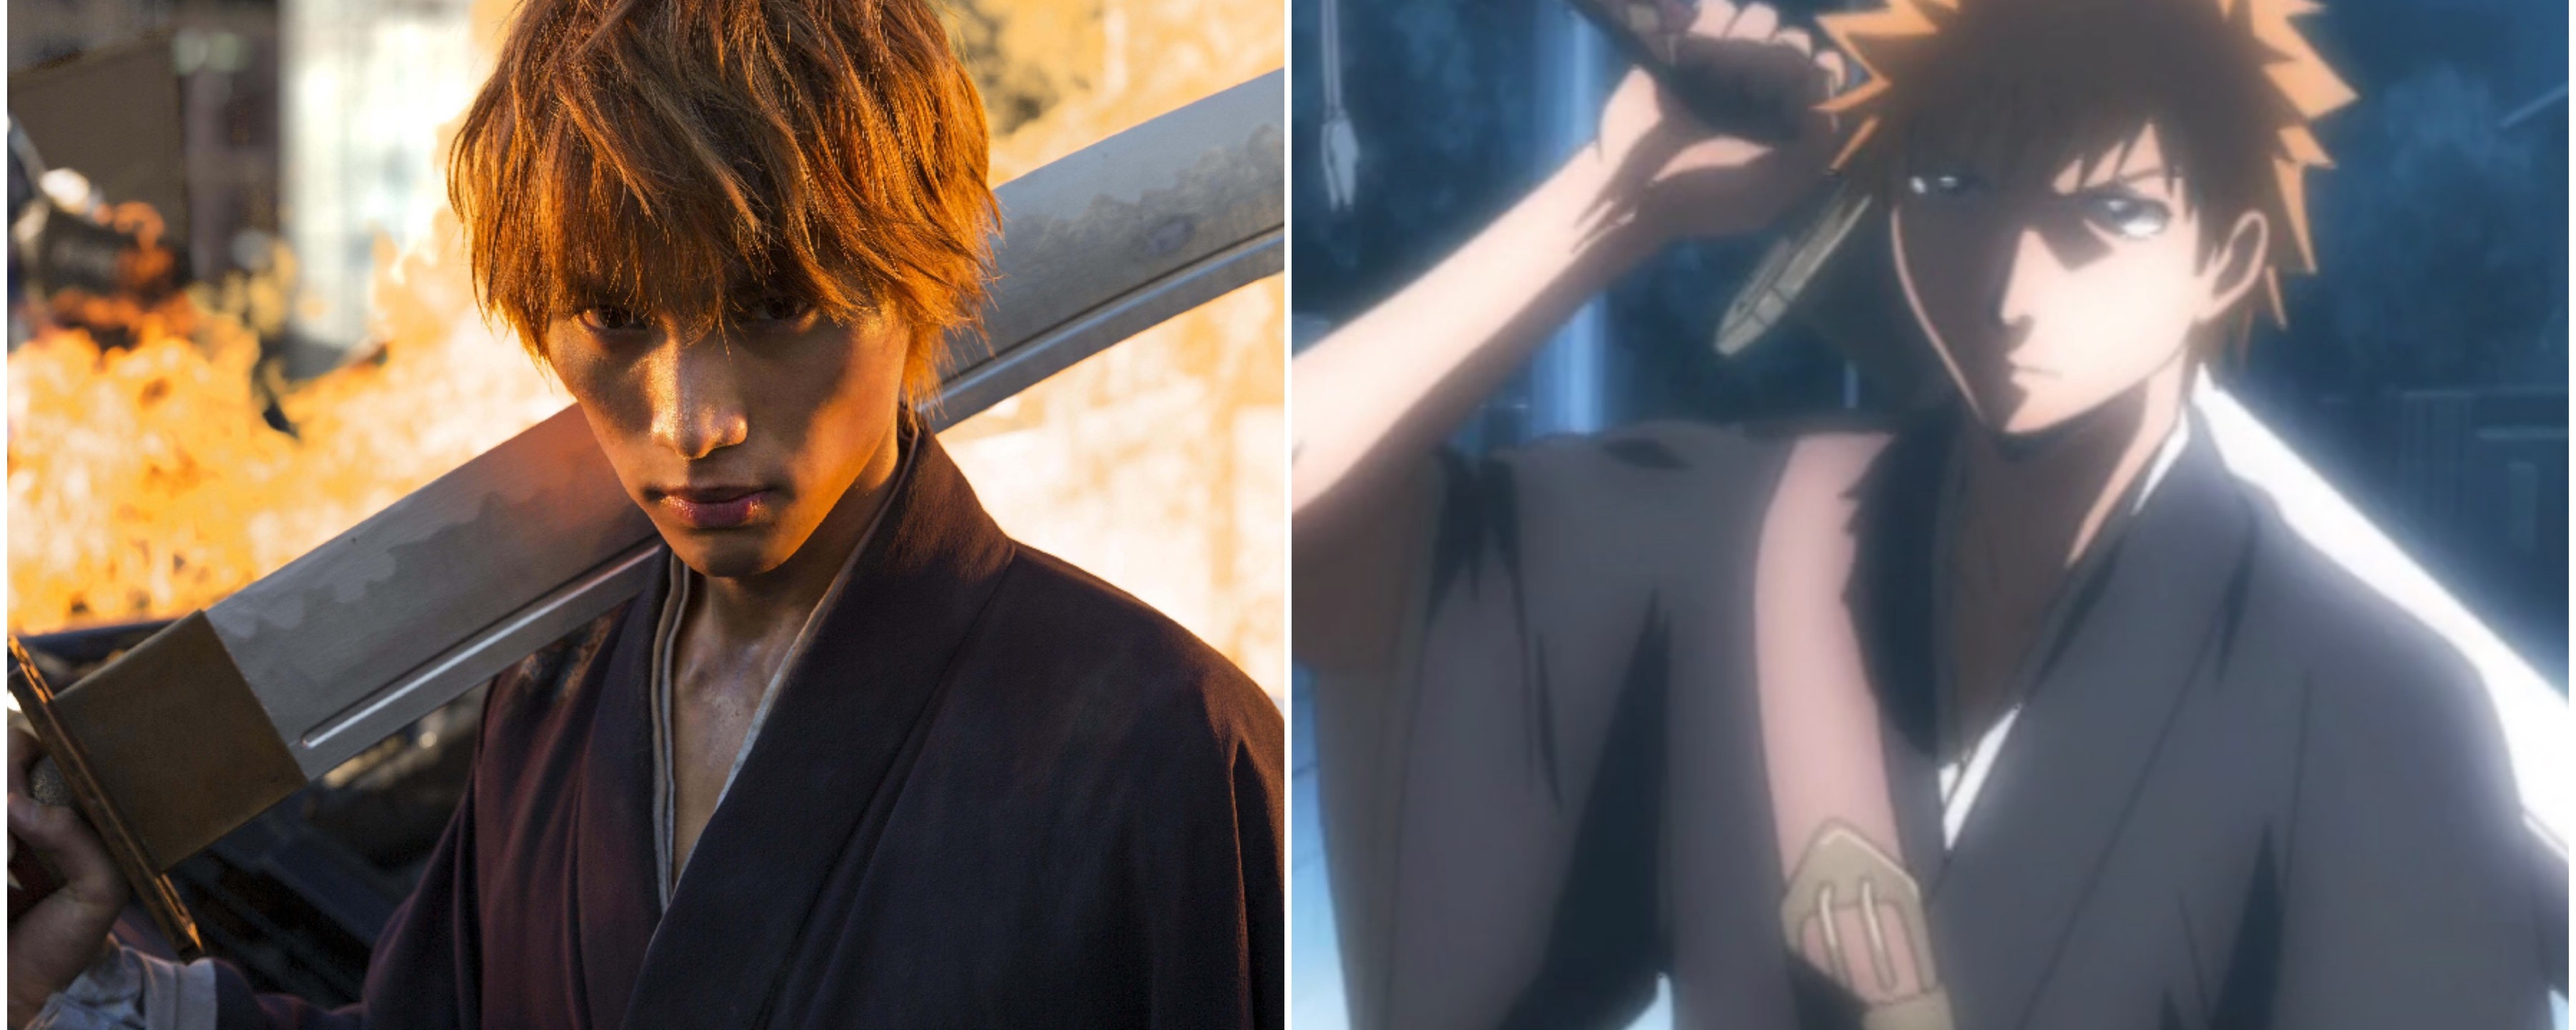 Bleach' Proves It's Possible to Make Good Live-Action Anime Movies